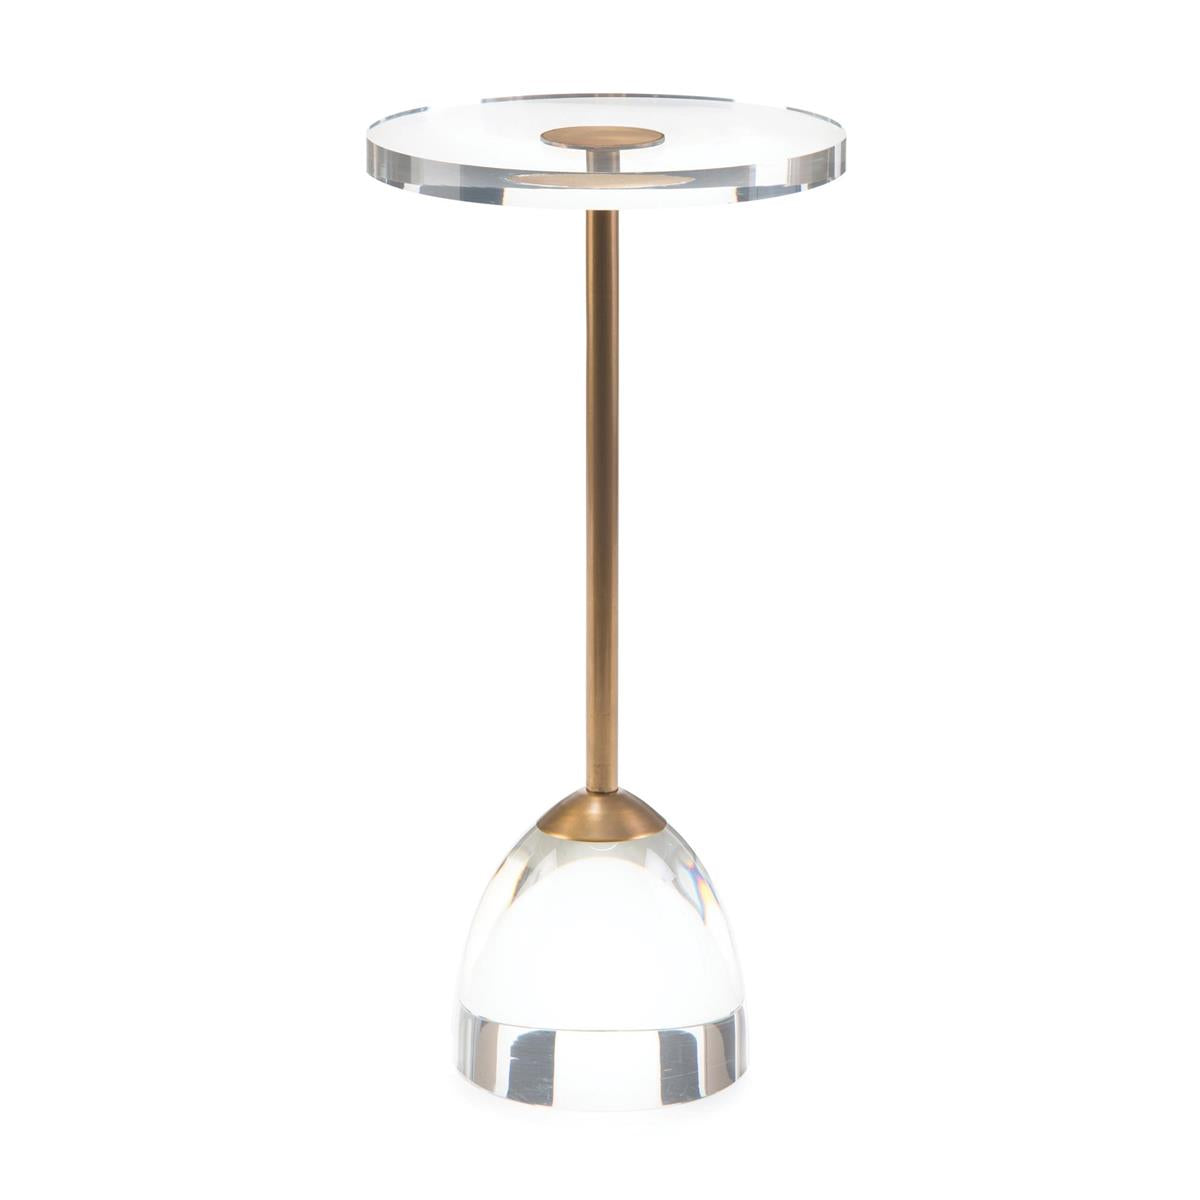 TABLE DRINK ACRYLIC TOP BRASS ROUND